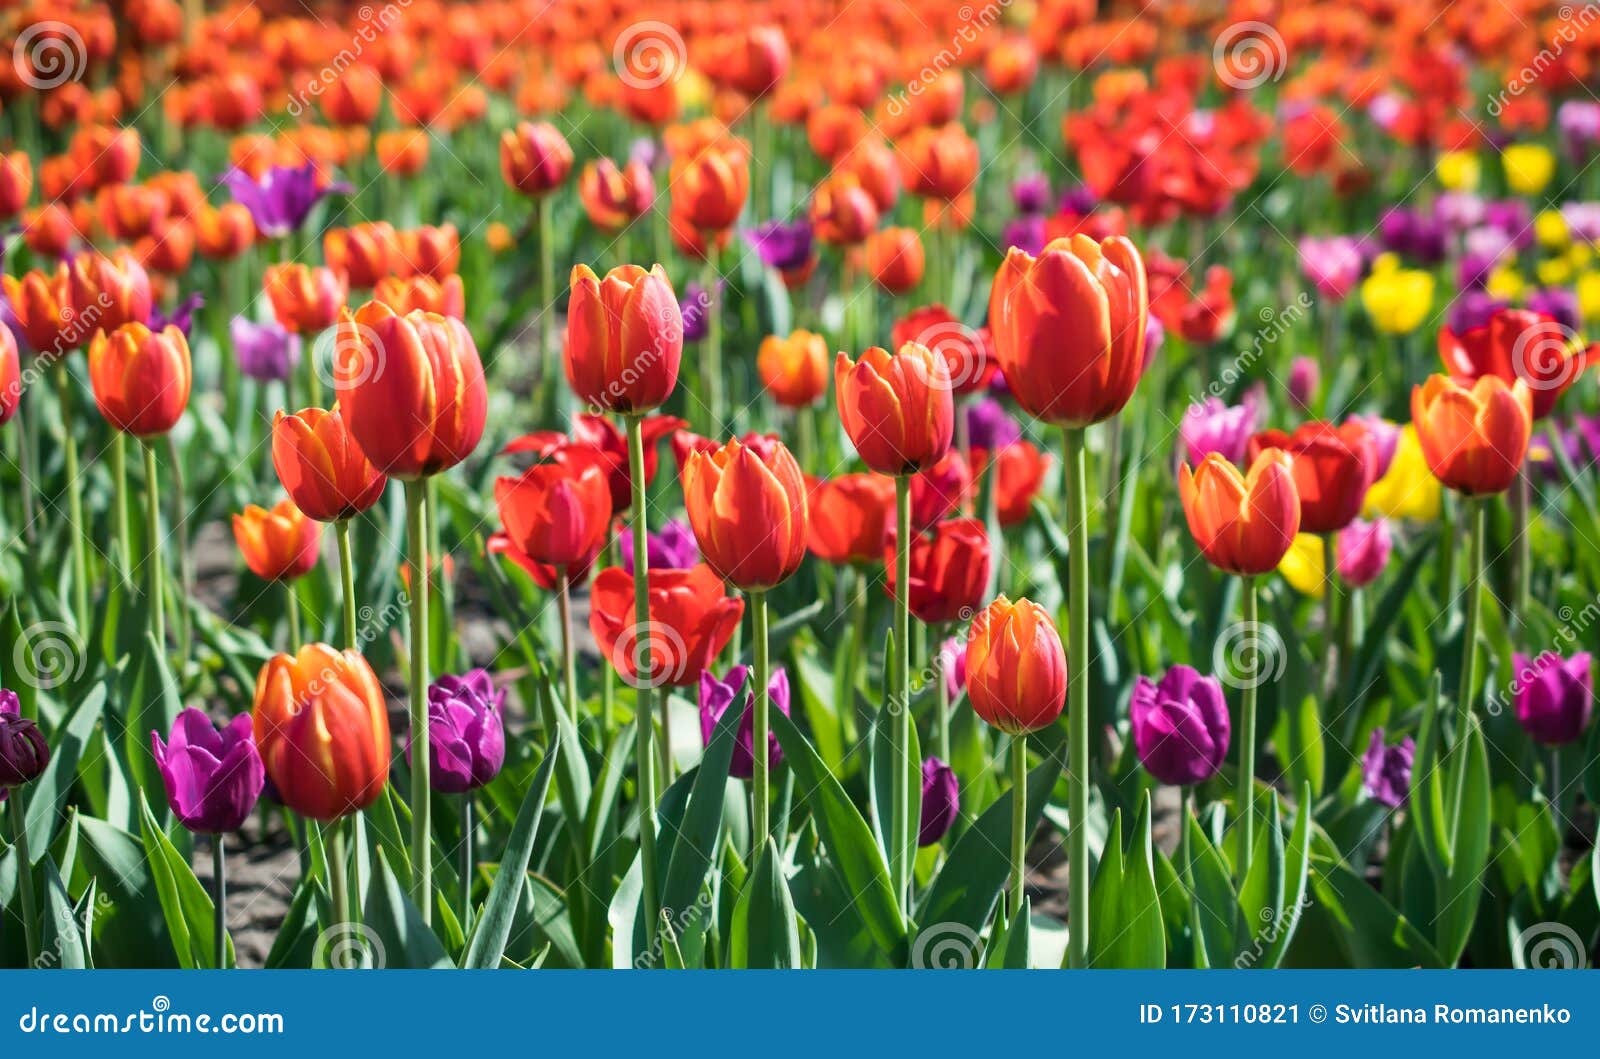 Spring Field of Many Bright Purple, Red, and Yellow Blooming Tulips ...